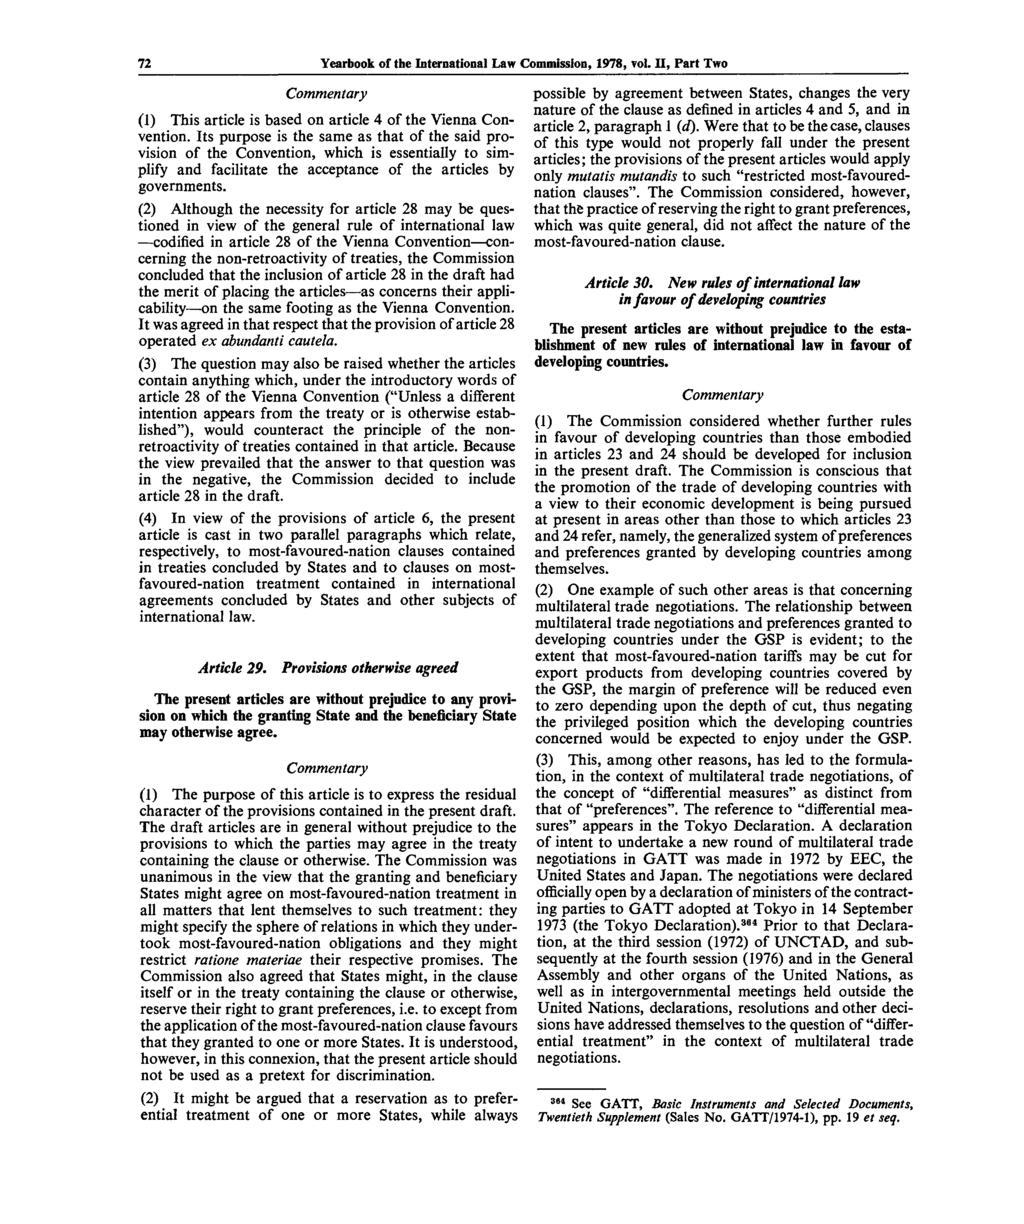 72 Yearbook of the International Law Commission, 1978, vol. II, Part Two Commentary (1) This article is based on article 4 of the Vienna Convention.